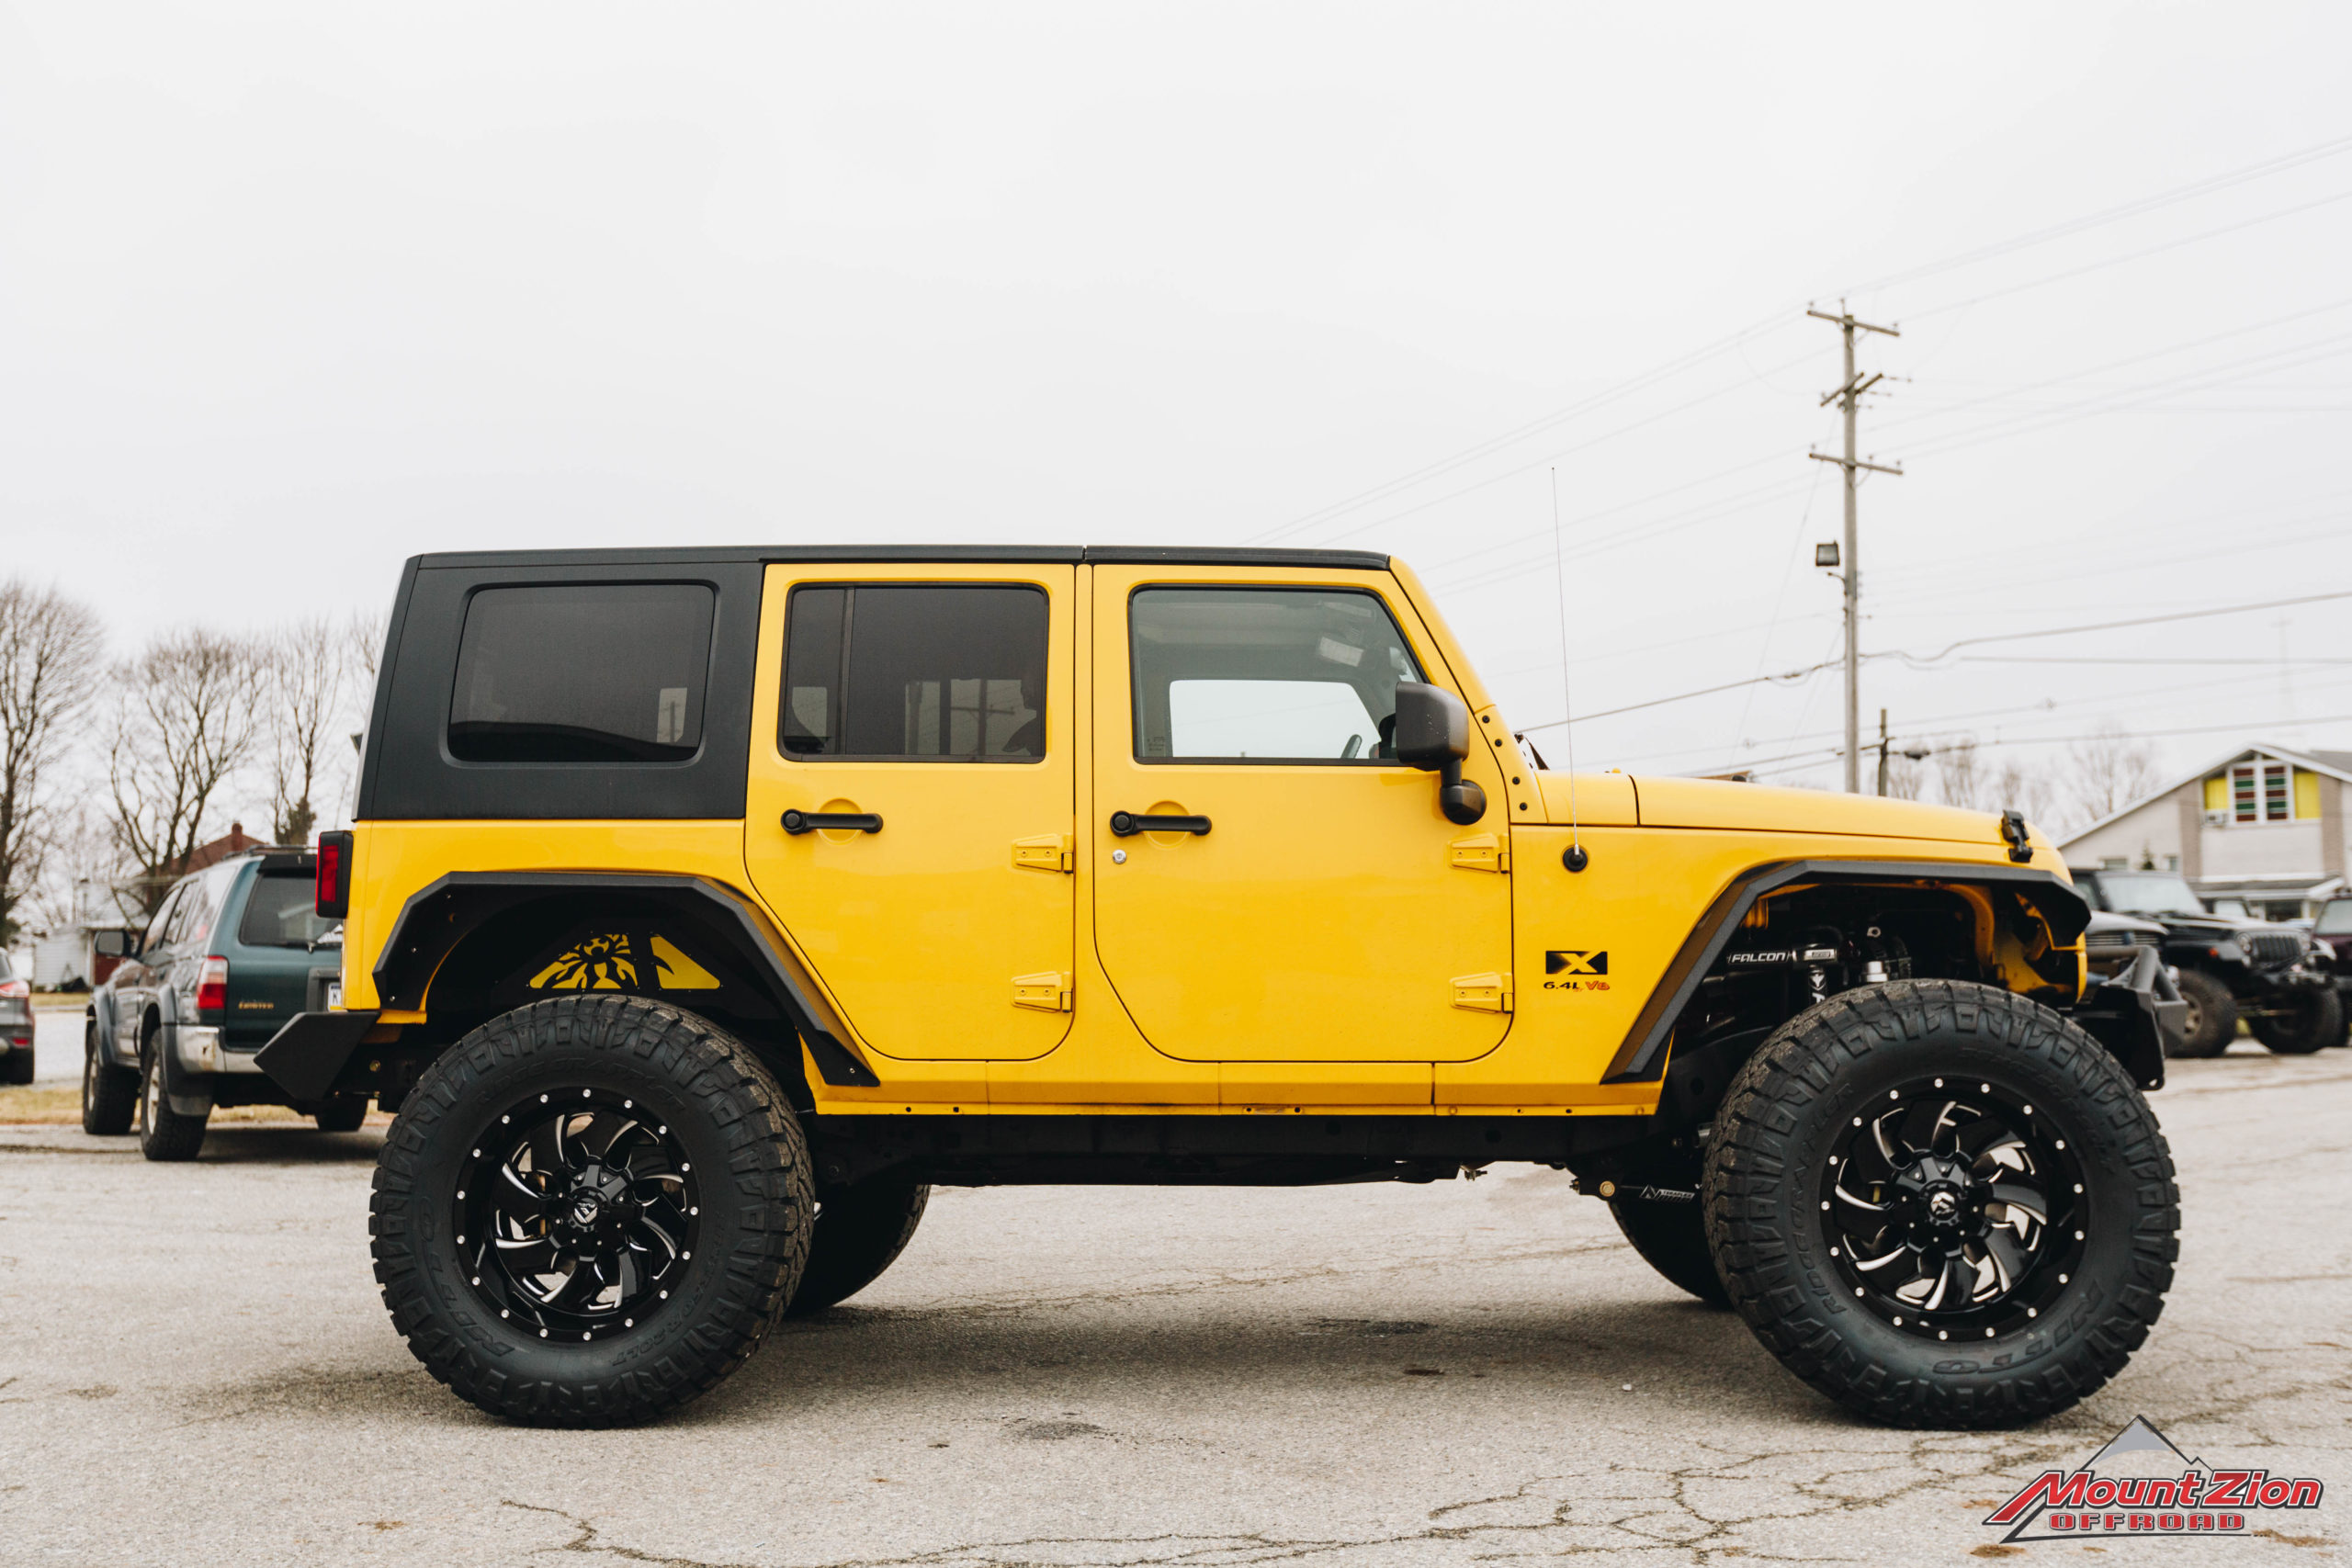 2008 Jeep Wrangler Unlimited X - Mount Zion Offroad